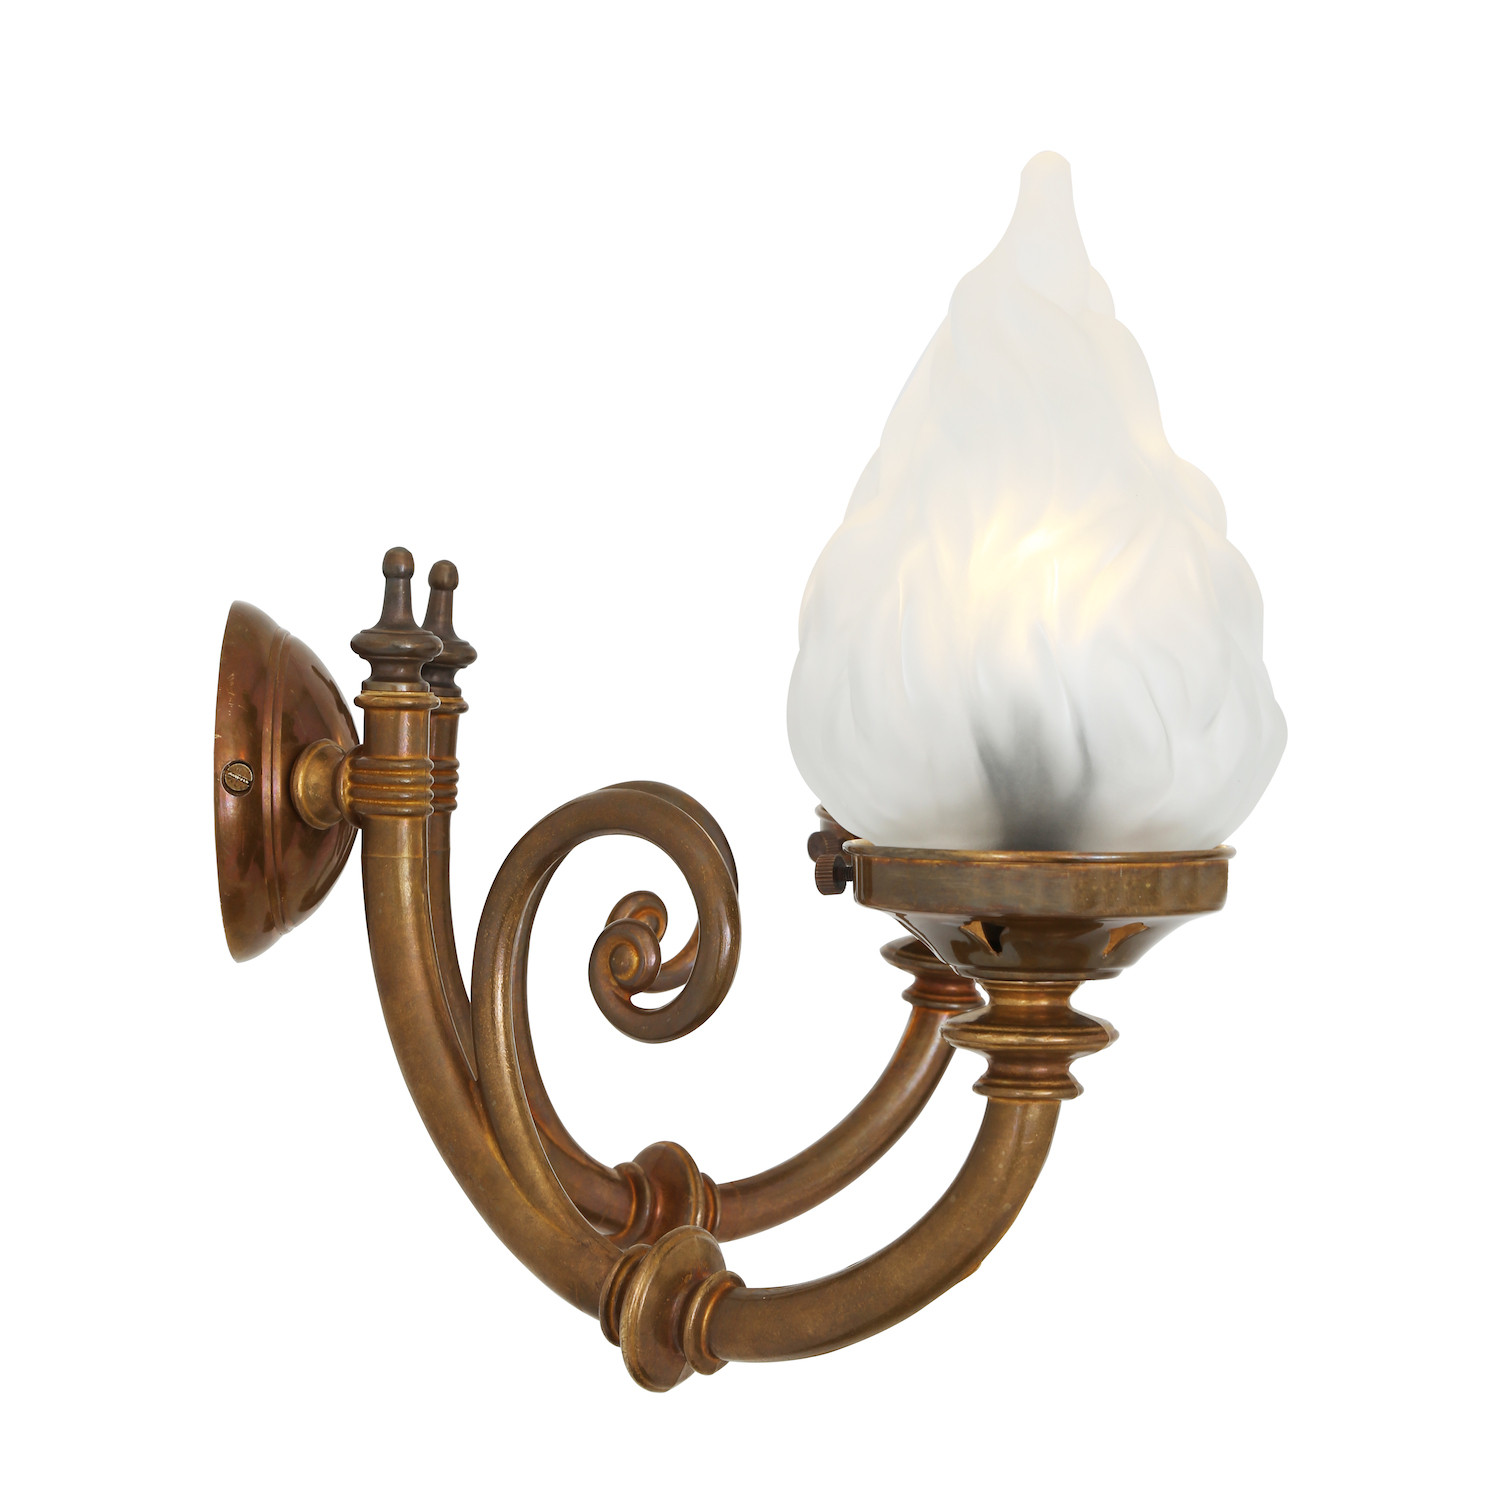 Two-Arm Wall Light With Satined Flame Shaped Glass: Alt-Messing patiniert